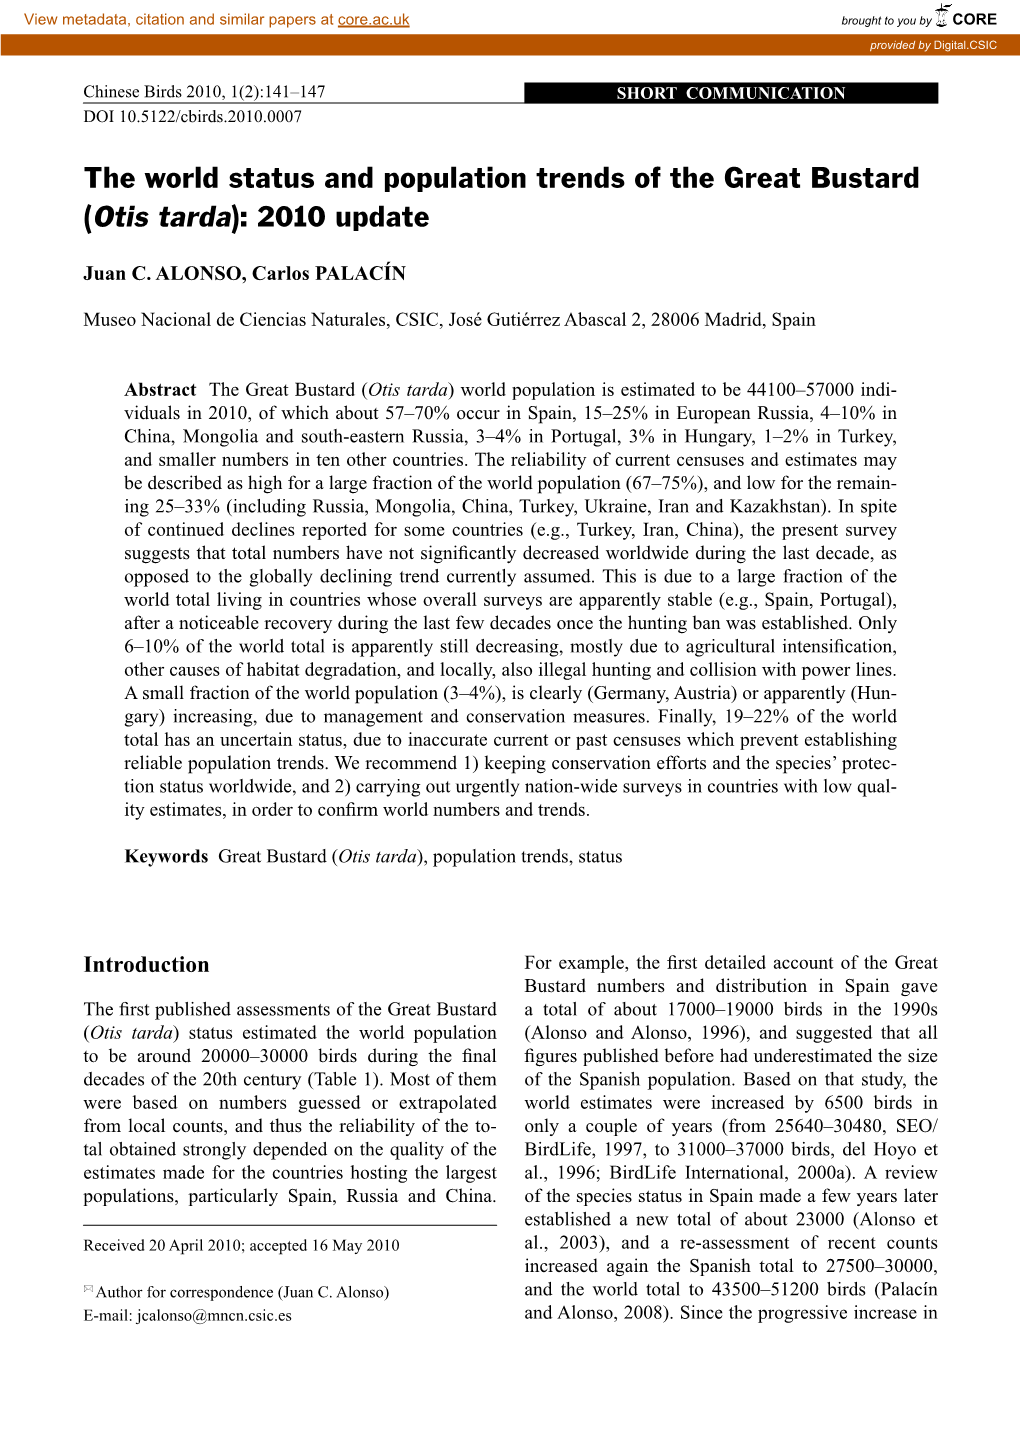 The World Status and Population Trends of the Great Bustard (Otis Tarda): 2010 Update